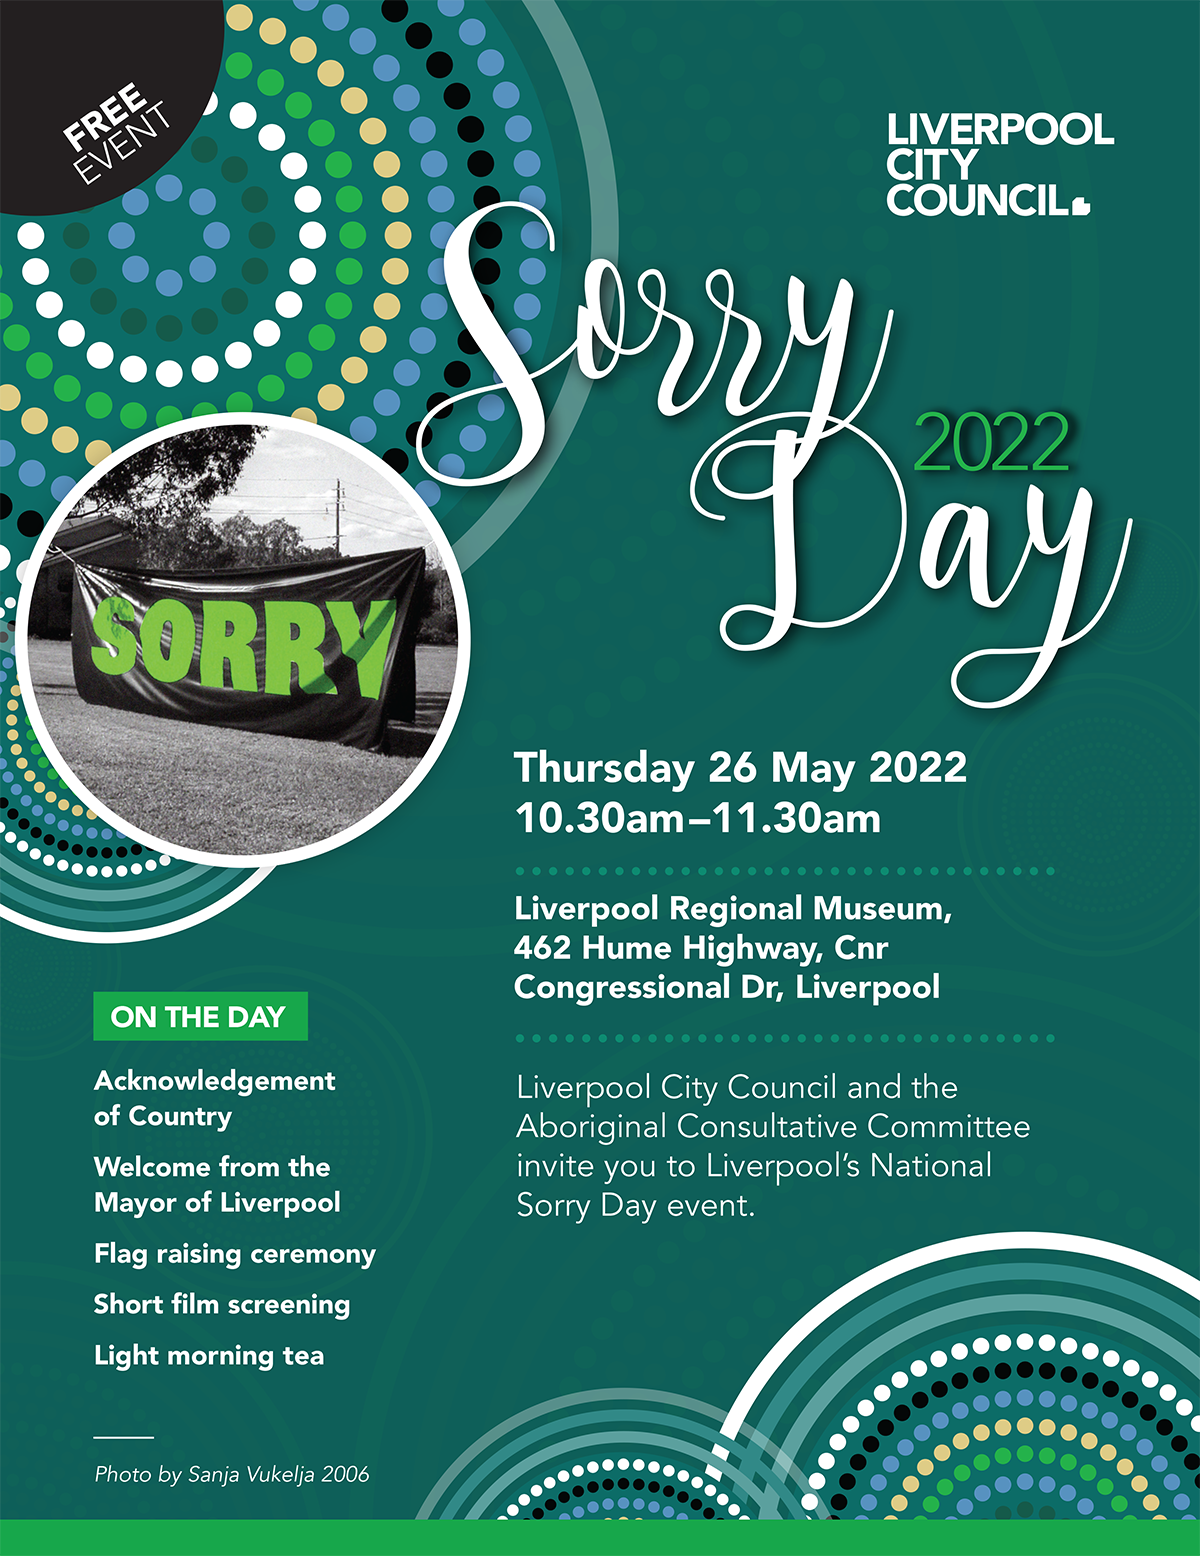 Sorry Day event